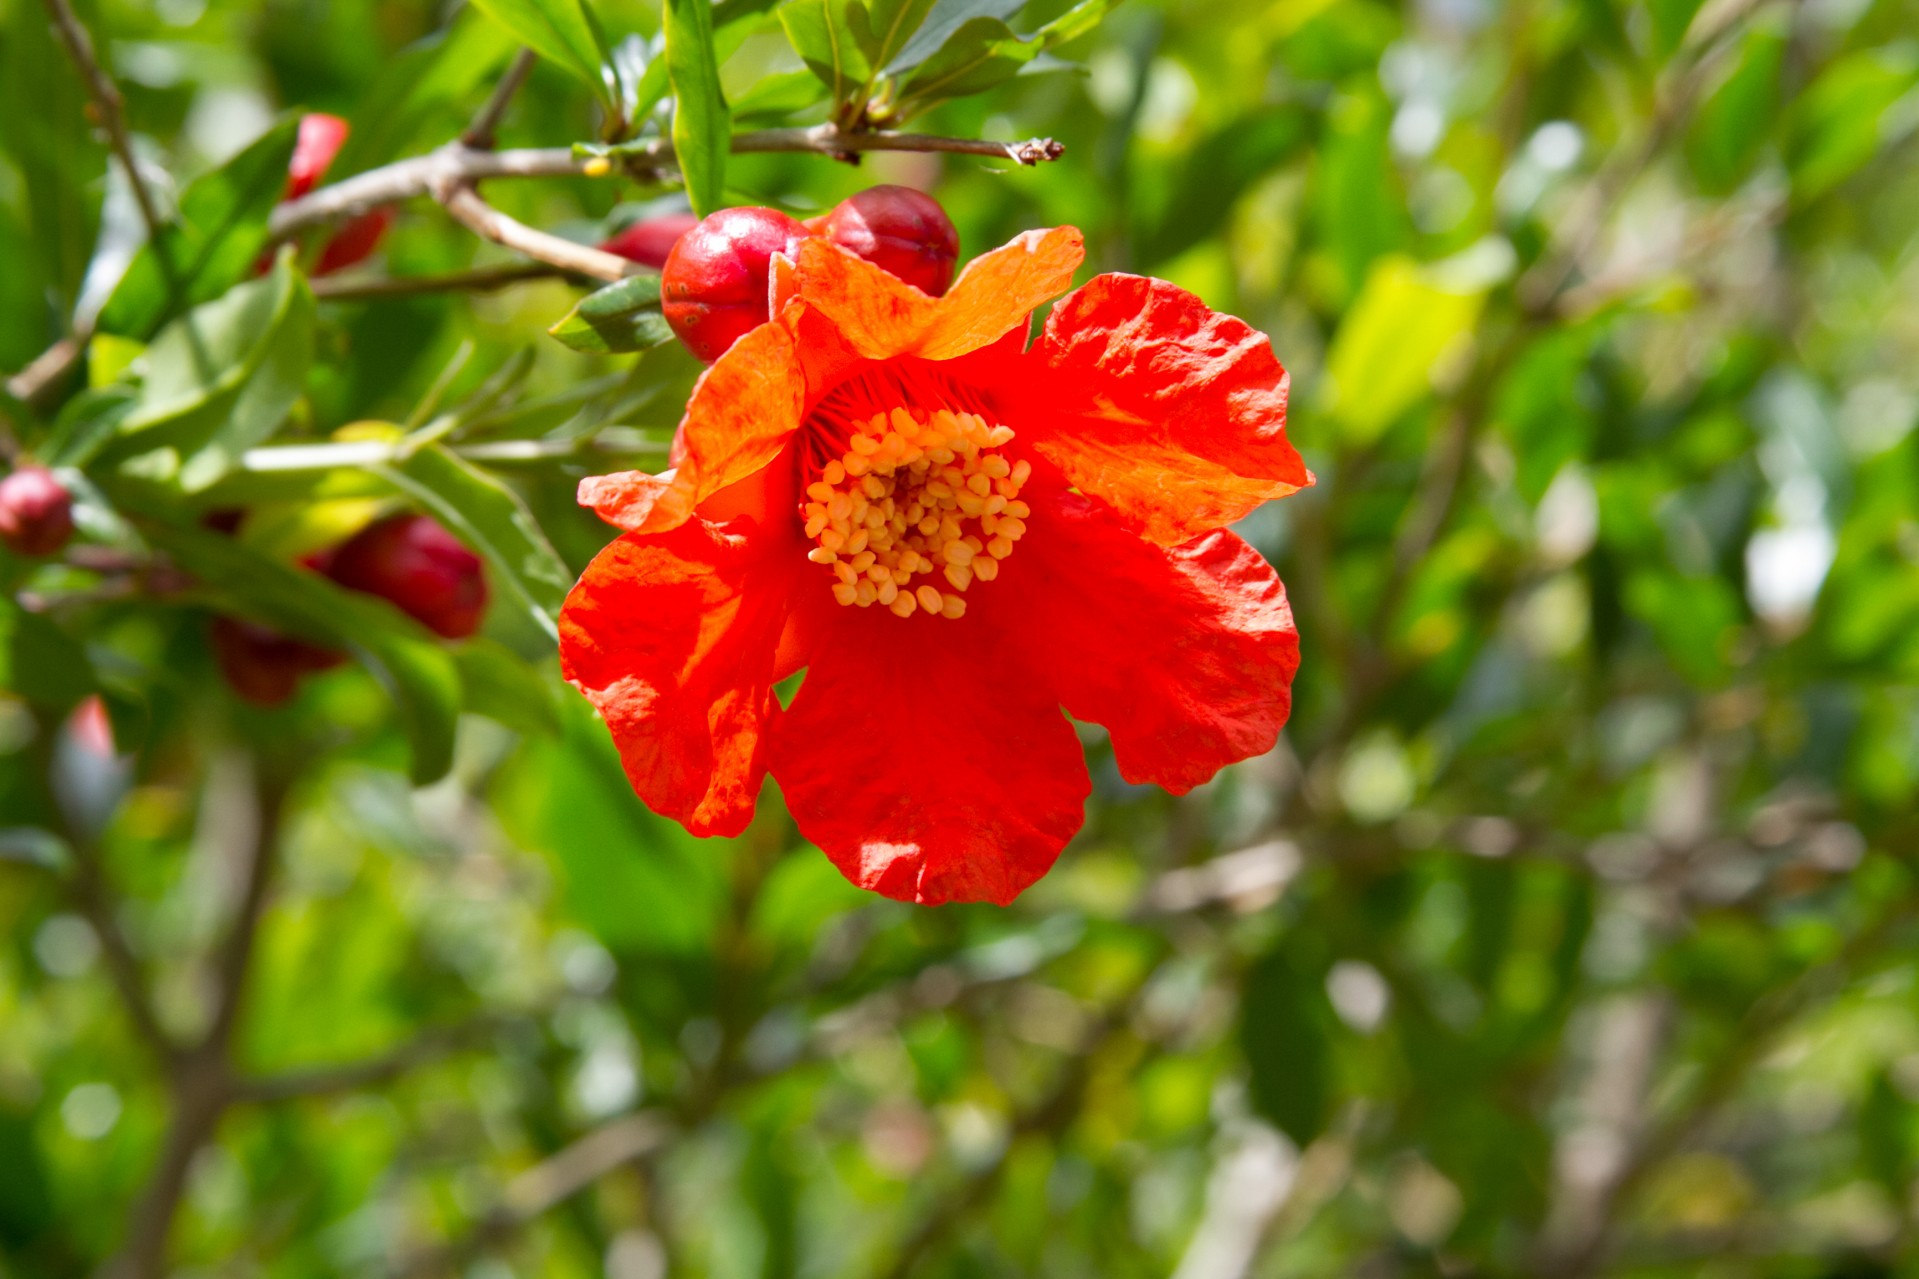 Pomegranate flower and buds